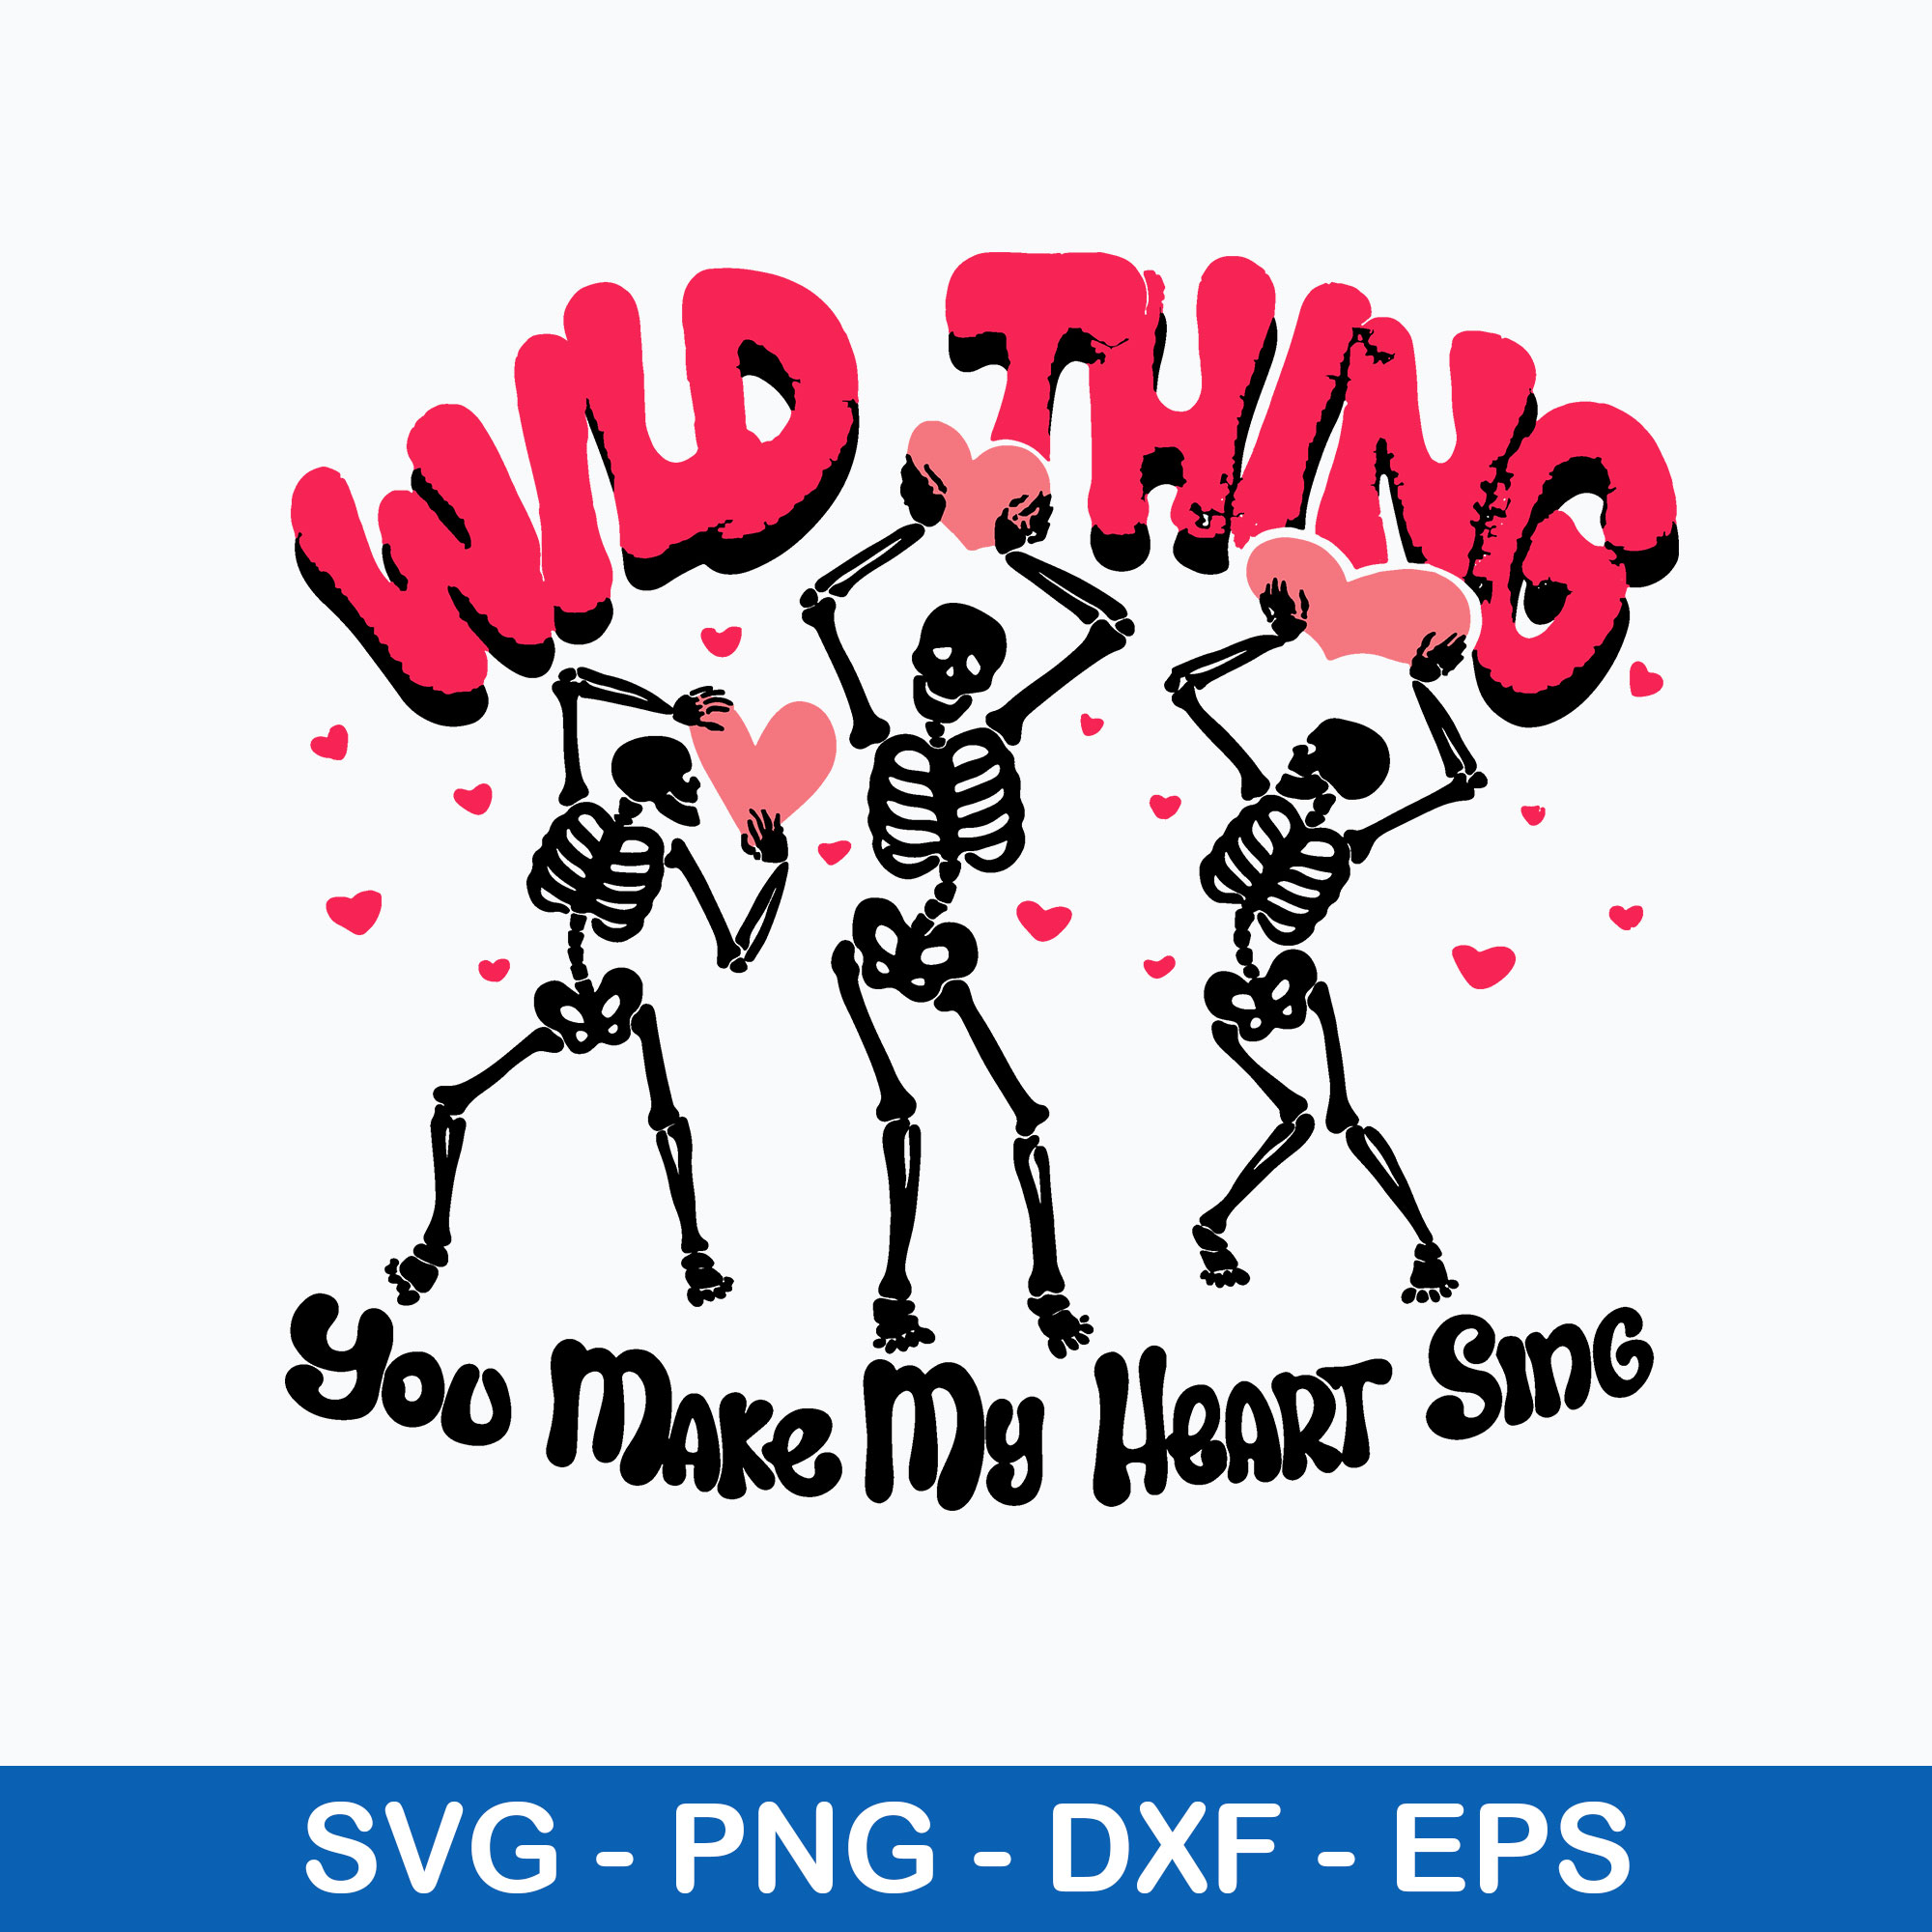 wild thing you make my heart sing svg